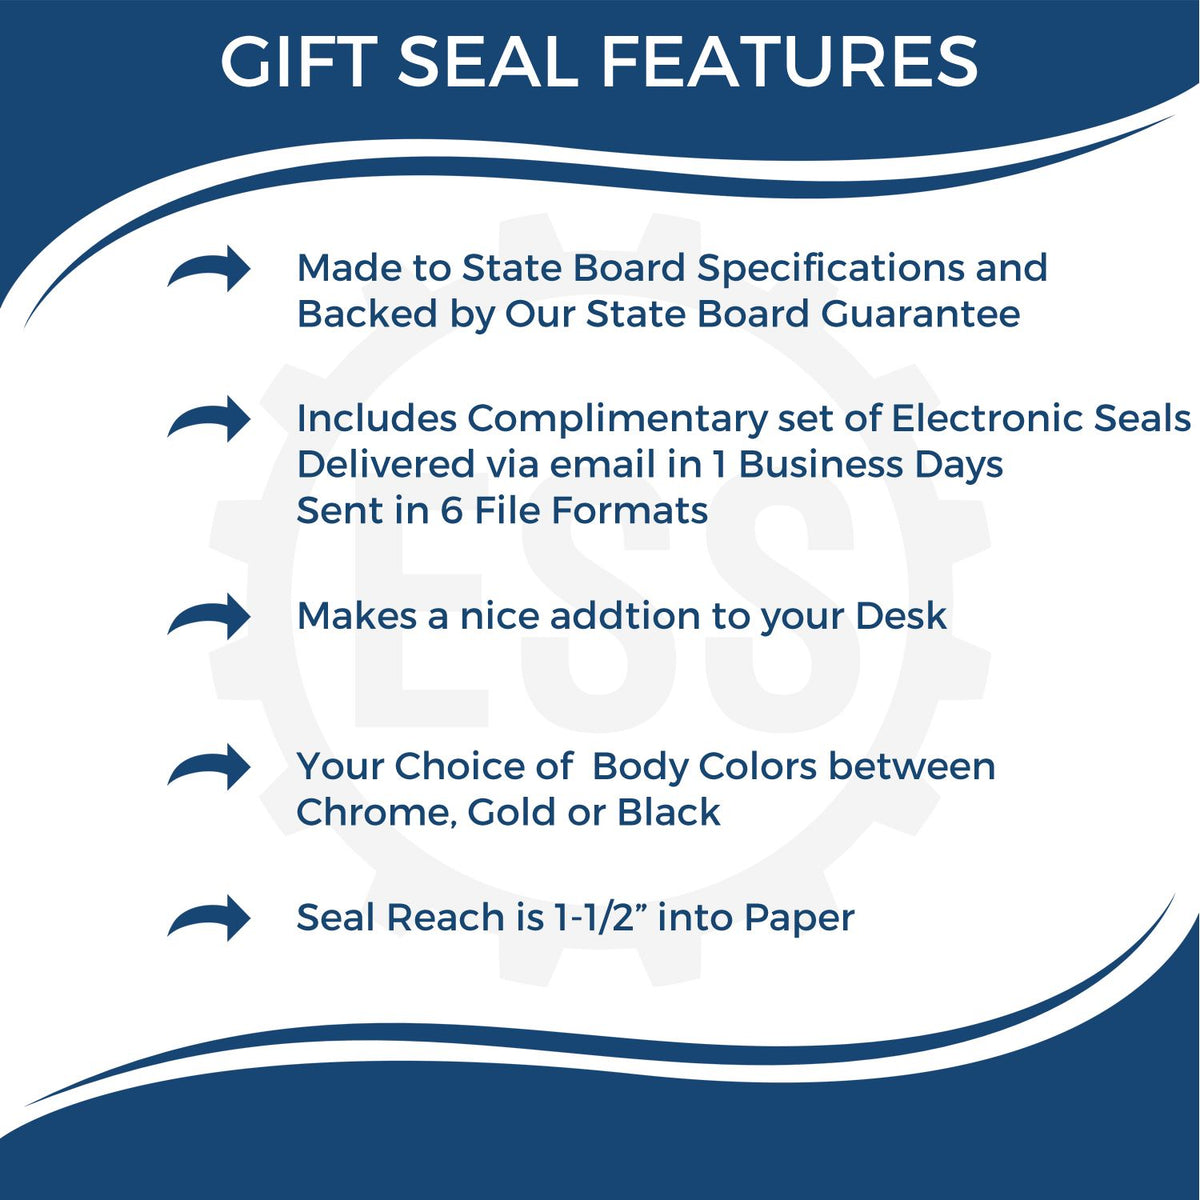 A picture of an infographic highlighting the selling points for the Gift New Jersey Engineer Seal